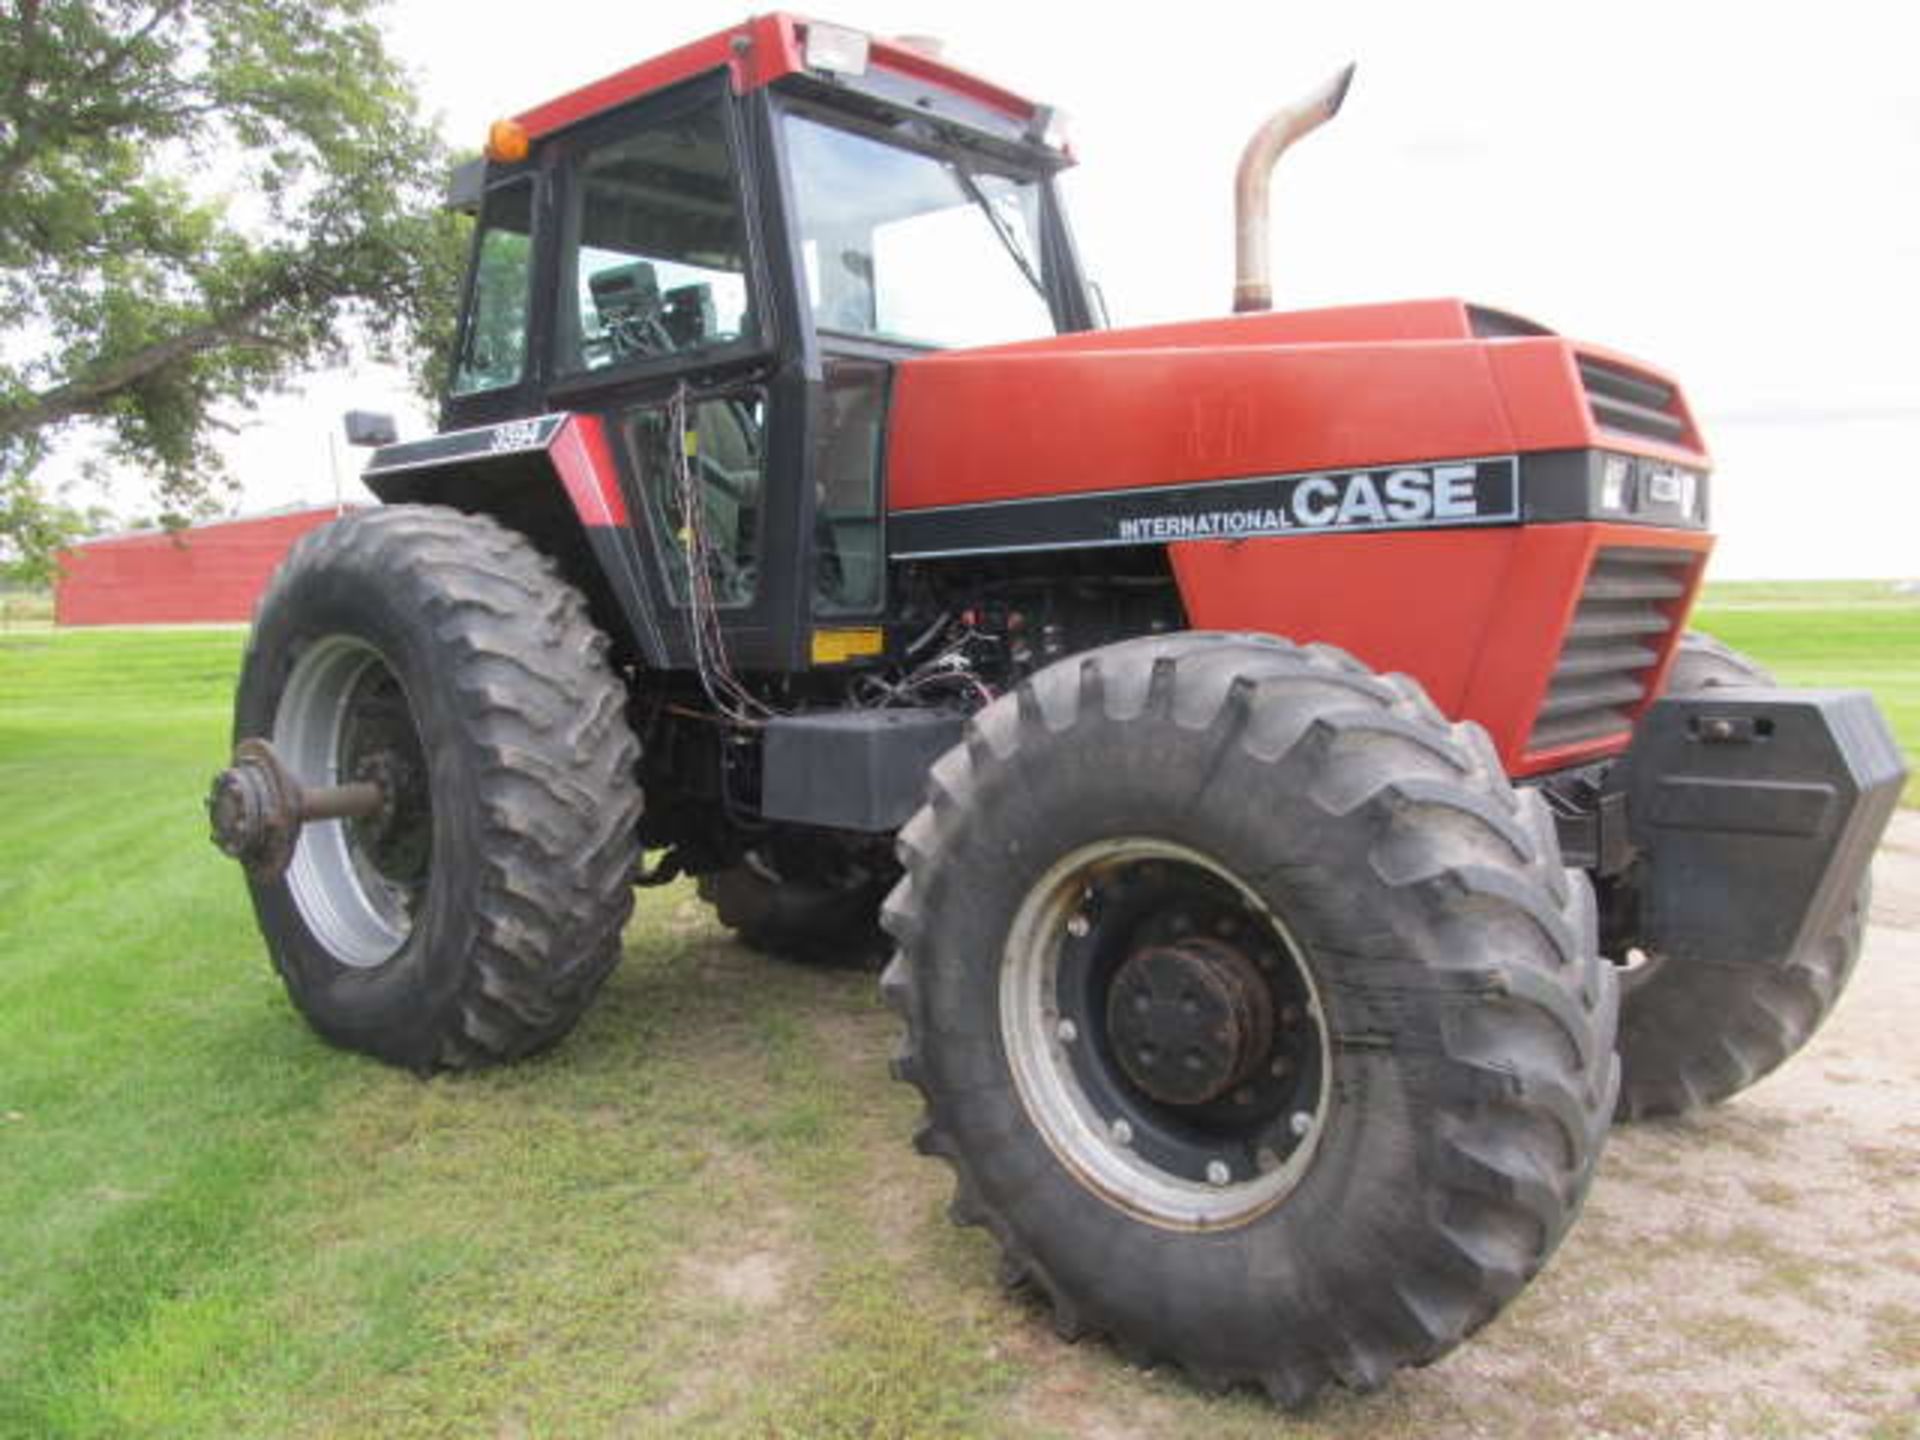 CASE IH 3594 FWA TRACTOR; 5830 Hours, Powershift, 3 Hydraulics, 20.8-38 Duals, SN.9947846-1987 - Image 2 of 6